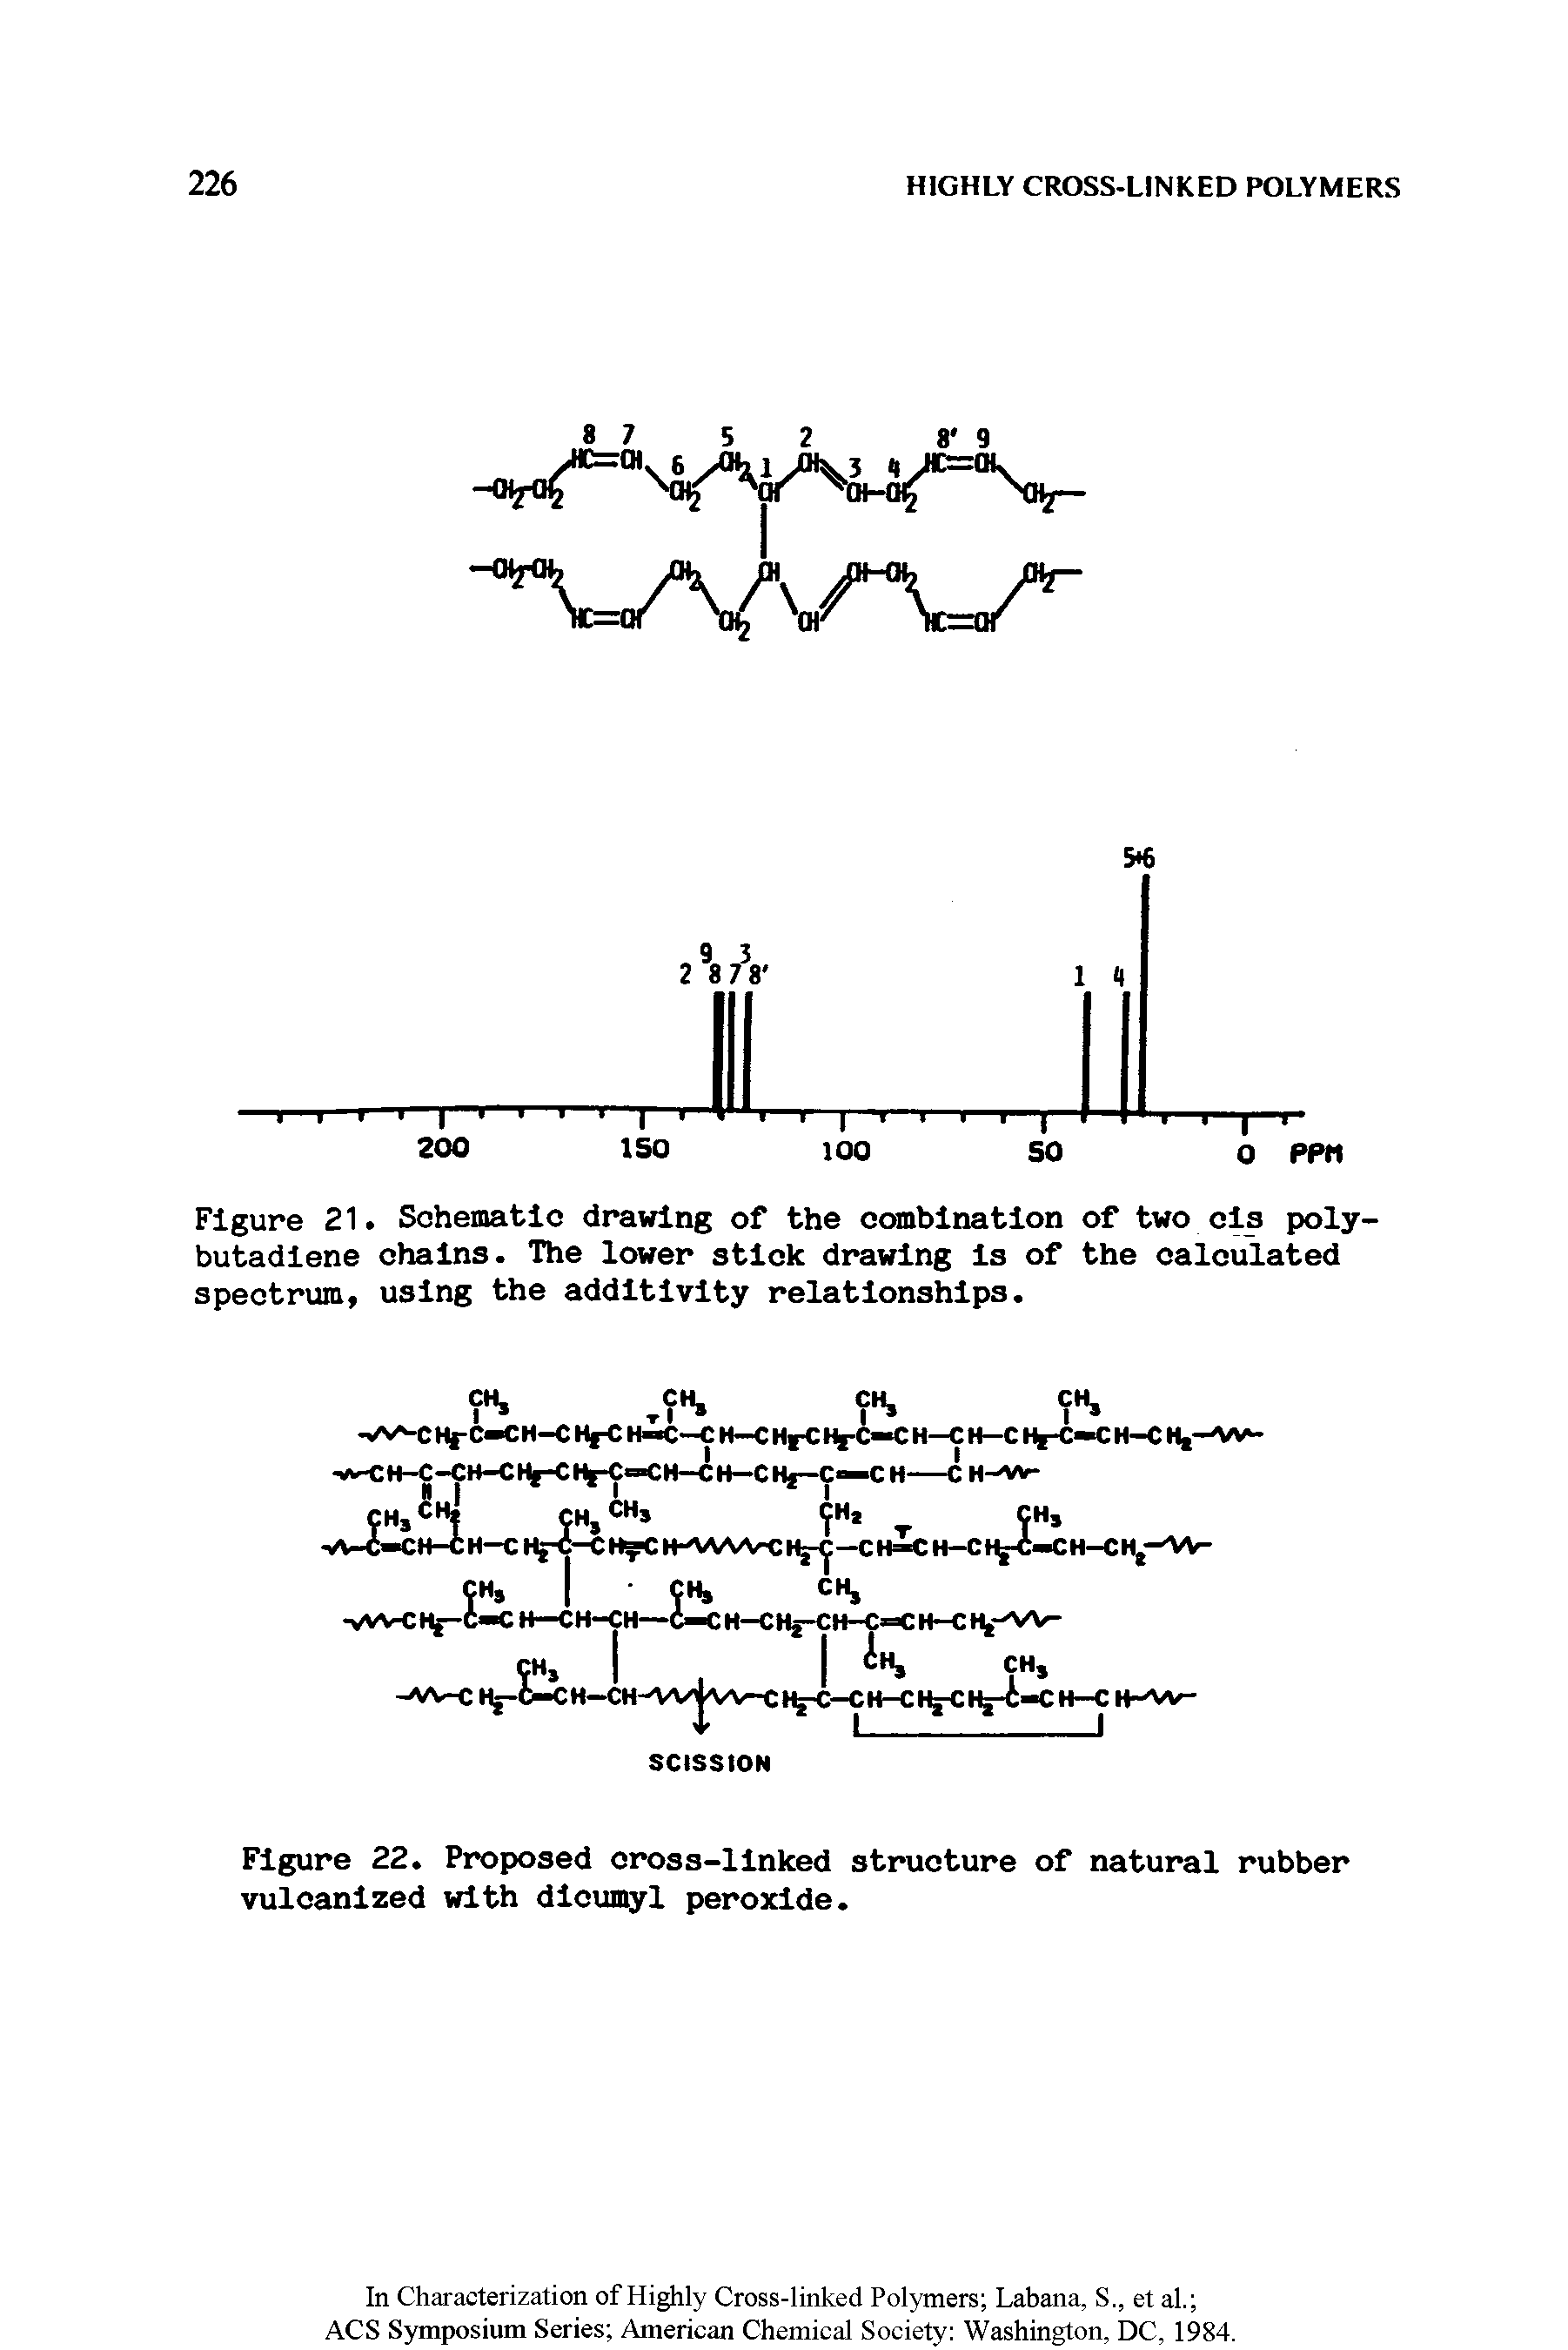 Figure 21. Schematic drawing of the combination of two els poly-butadiene chains. The lower stick drawing is of the calculated spectrum, using the additivity relationships.